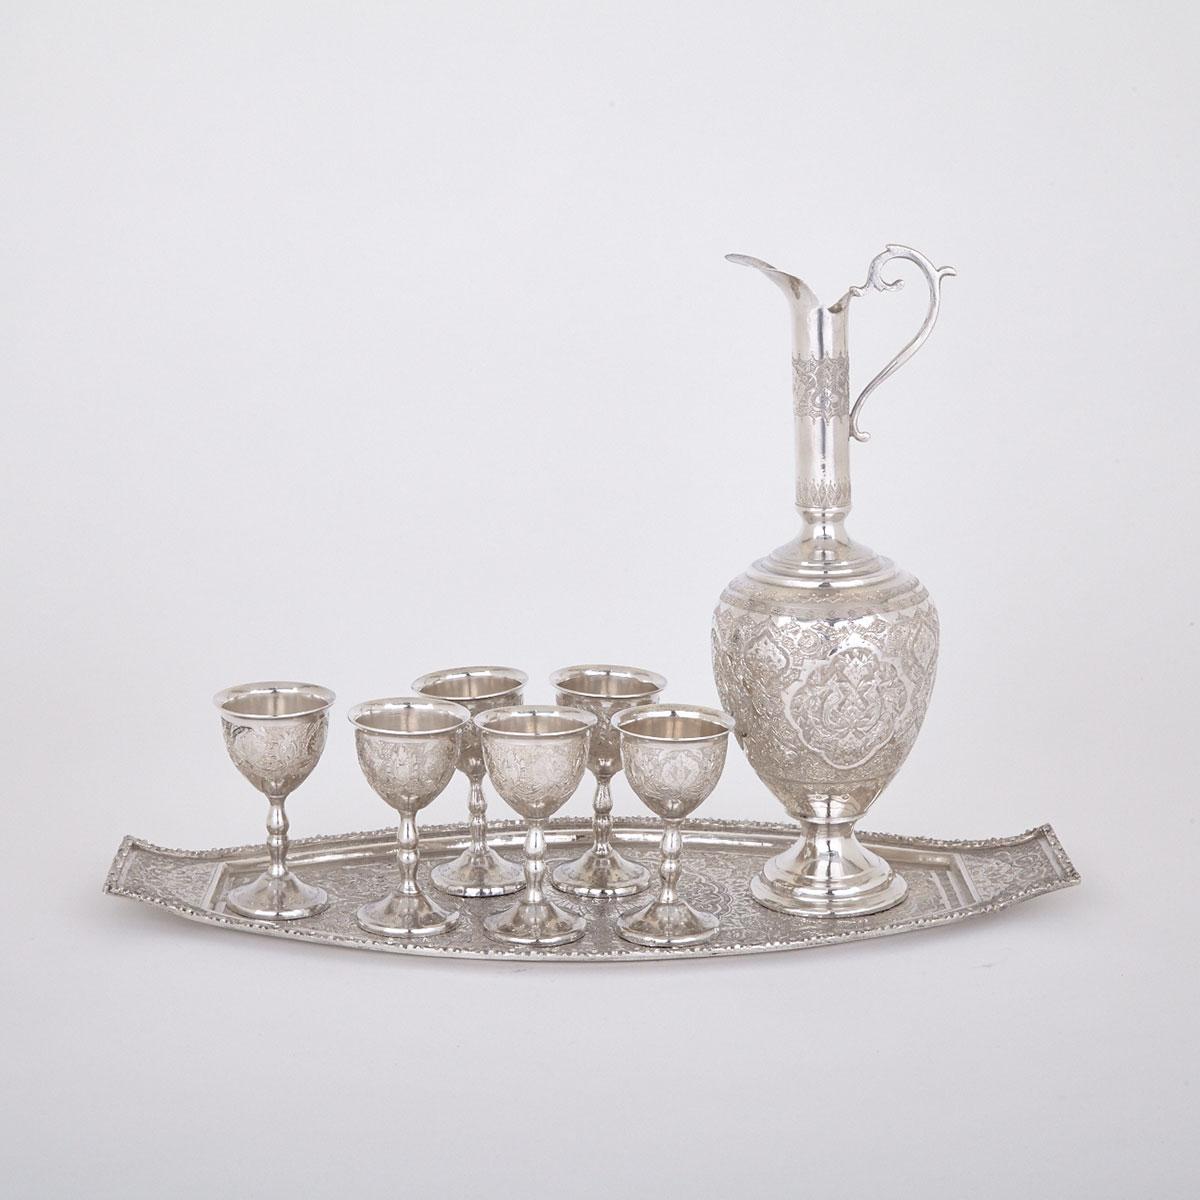 Six Persian Silver Goblets, Decanter and Tray, Biryayi, 20th century